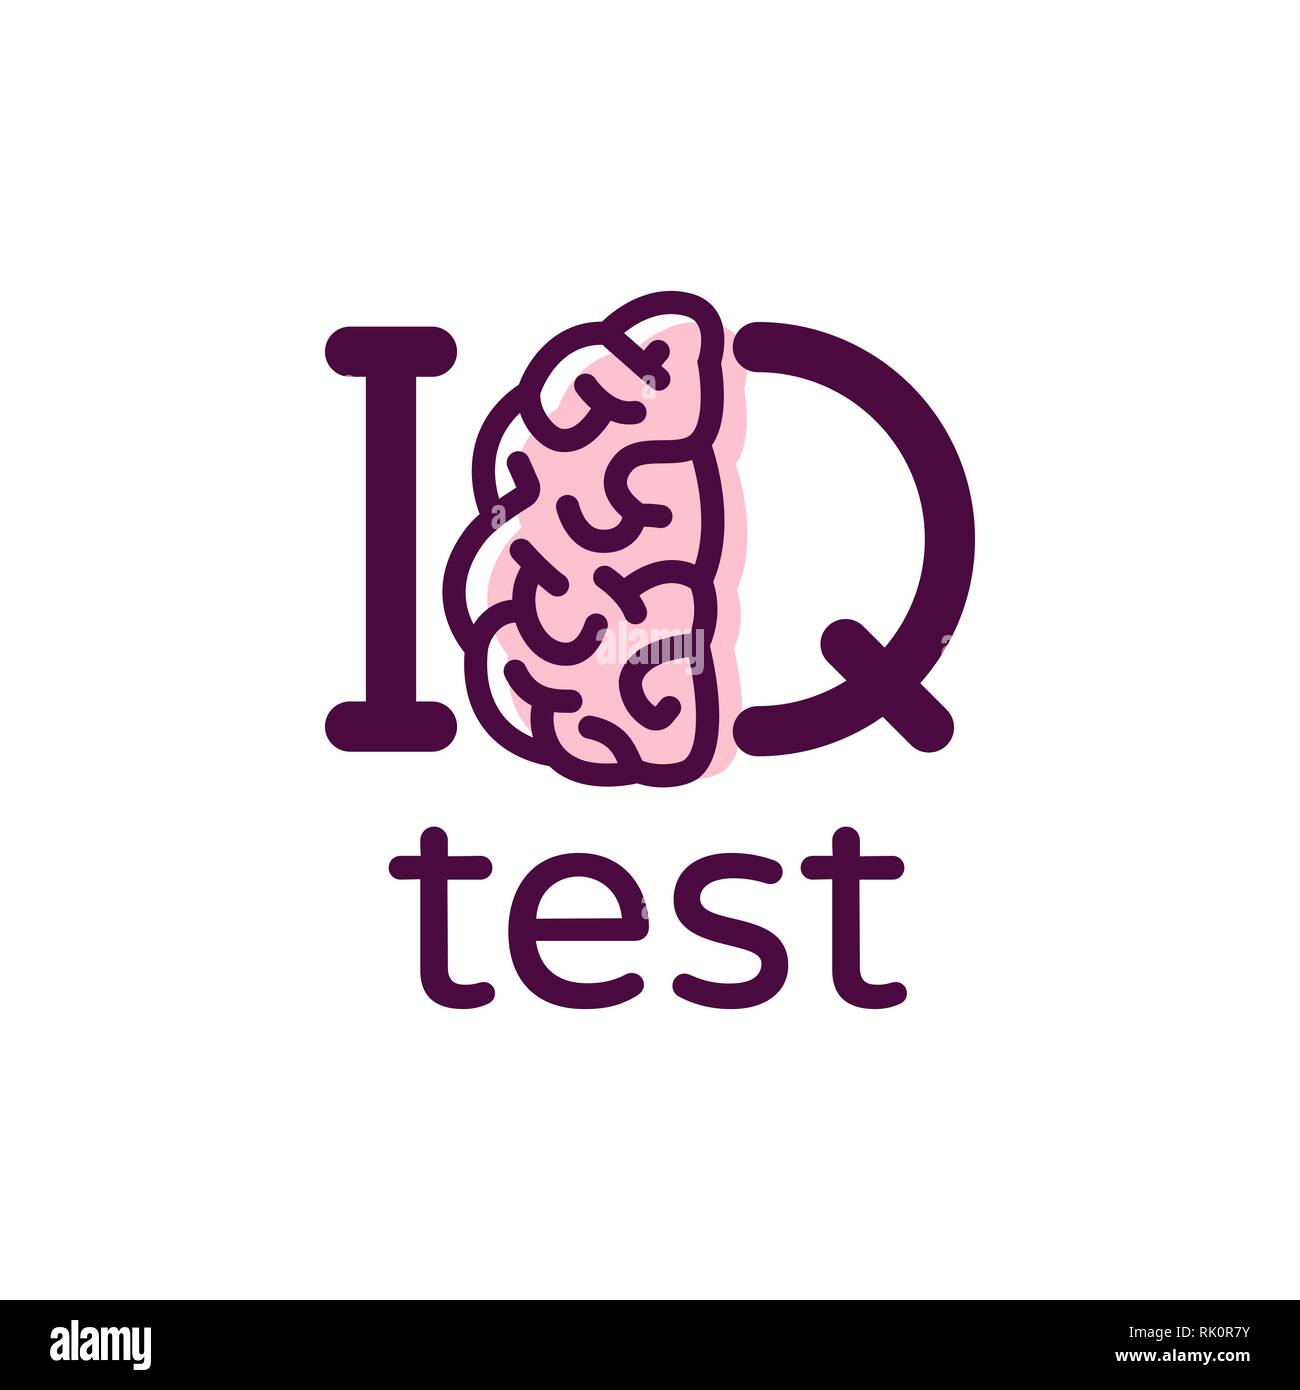 IQ test vector logo isolated on white background. Intellectual quotient IQ intelligence. Human brain Stock Vector